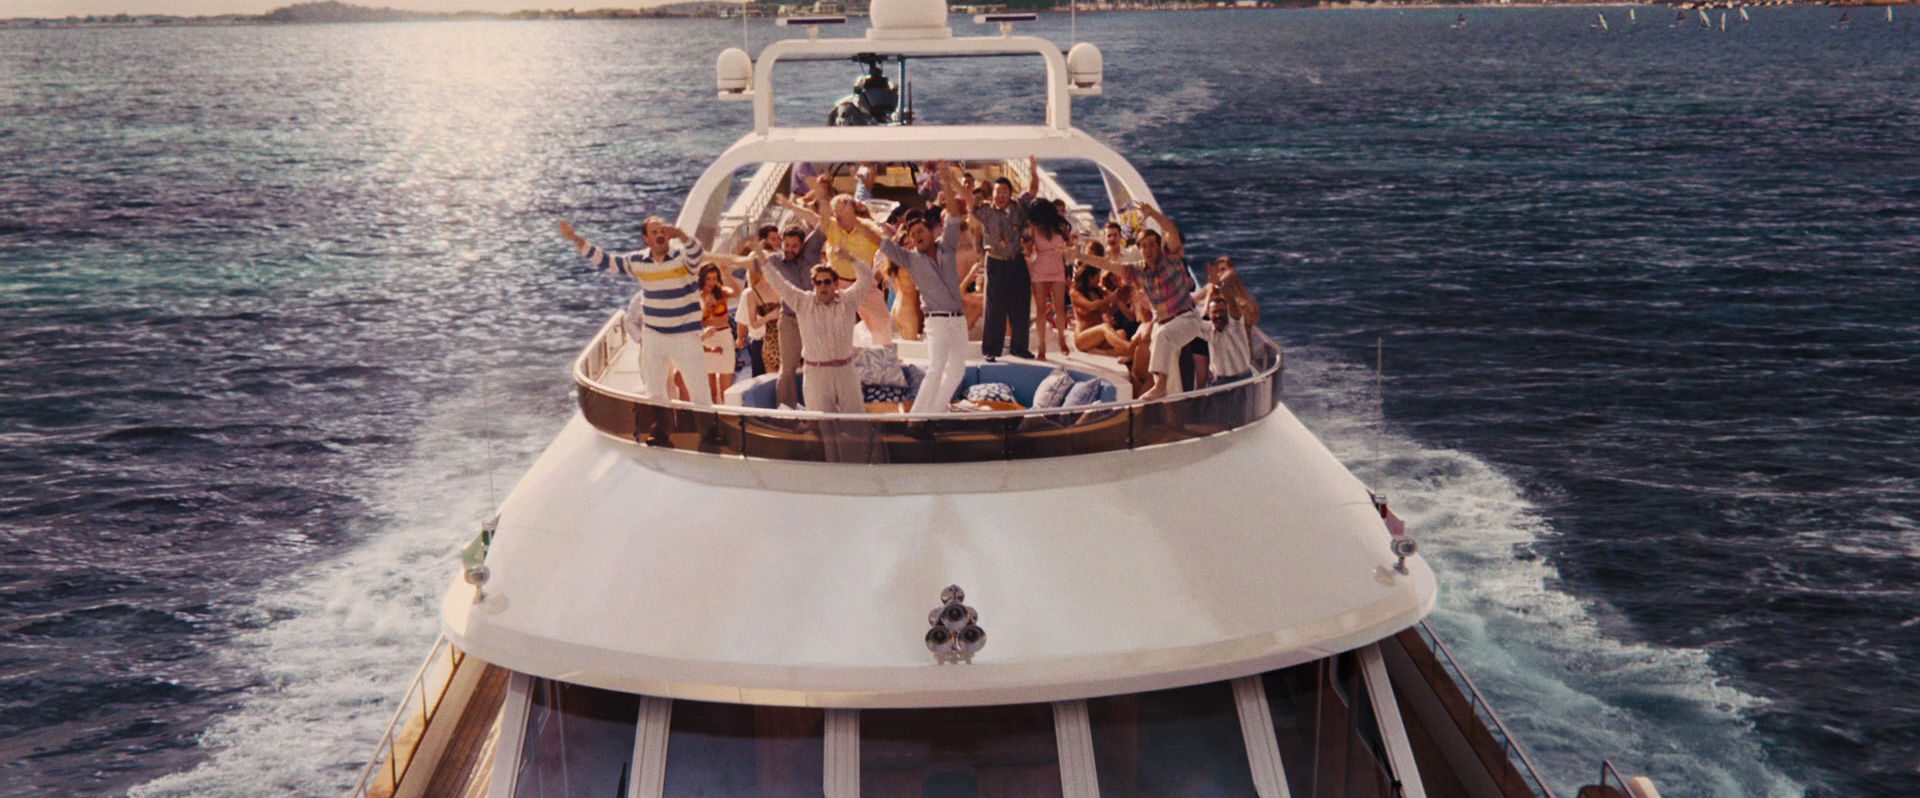 was the yacht scene in wolf of wall street real